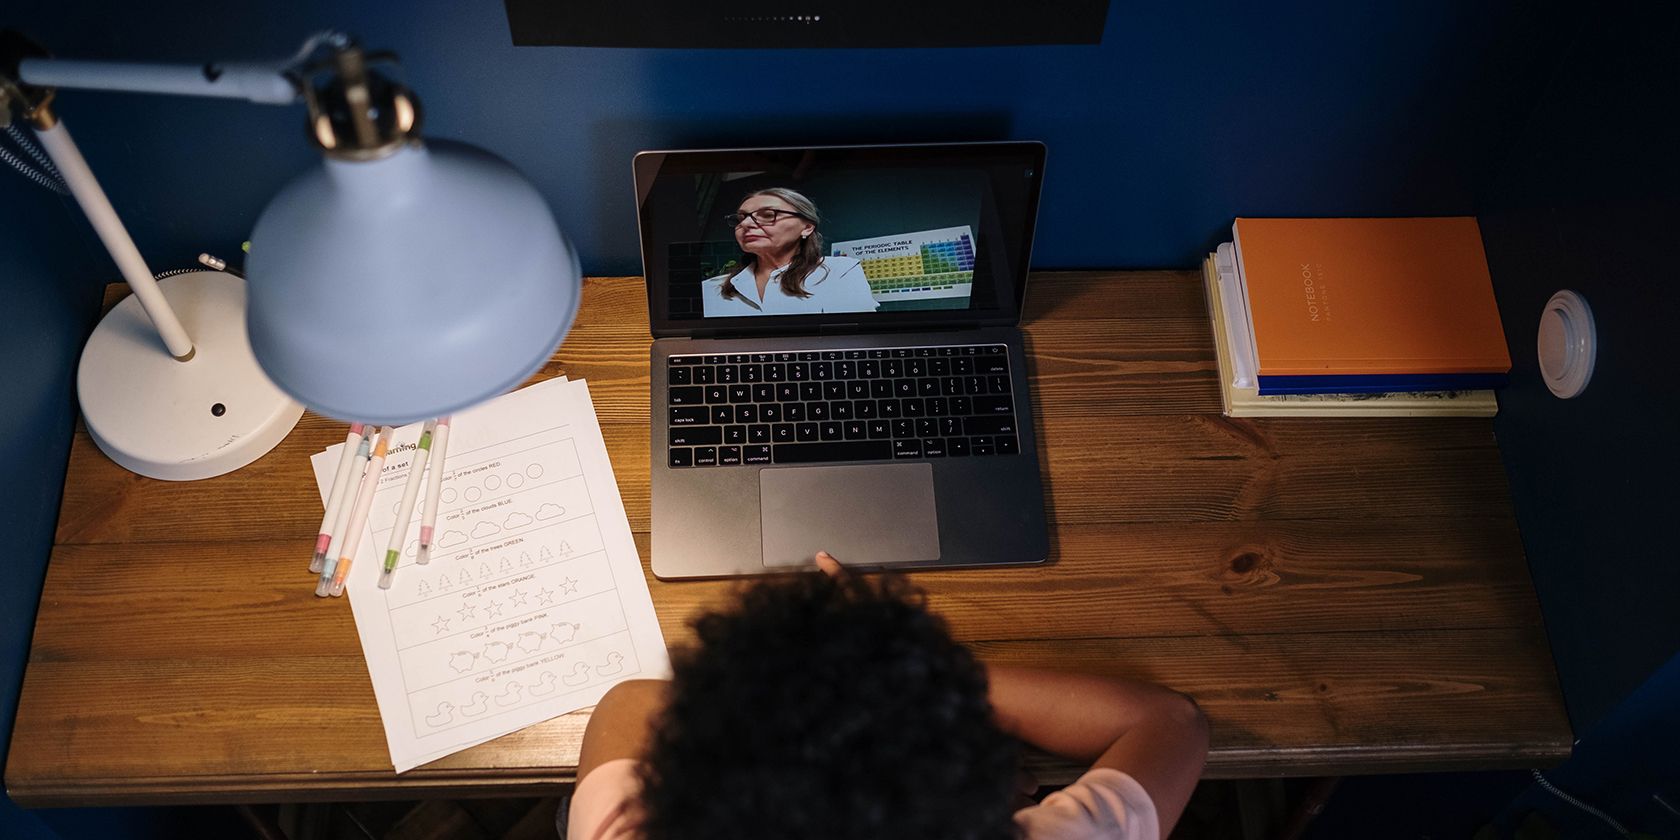 Skype video call on a laptop